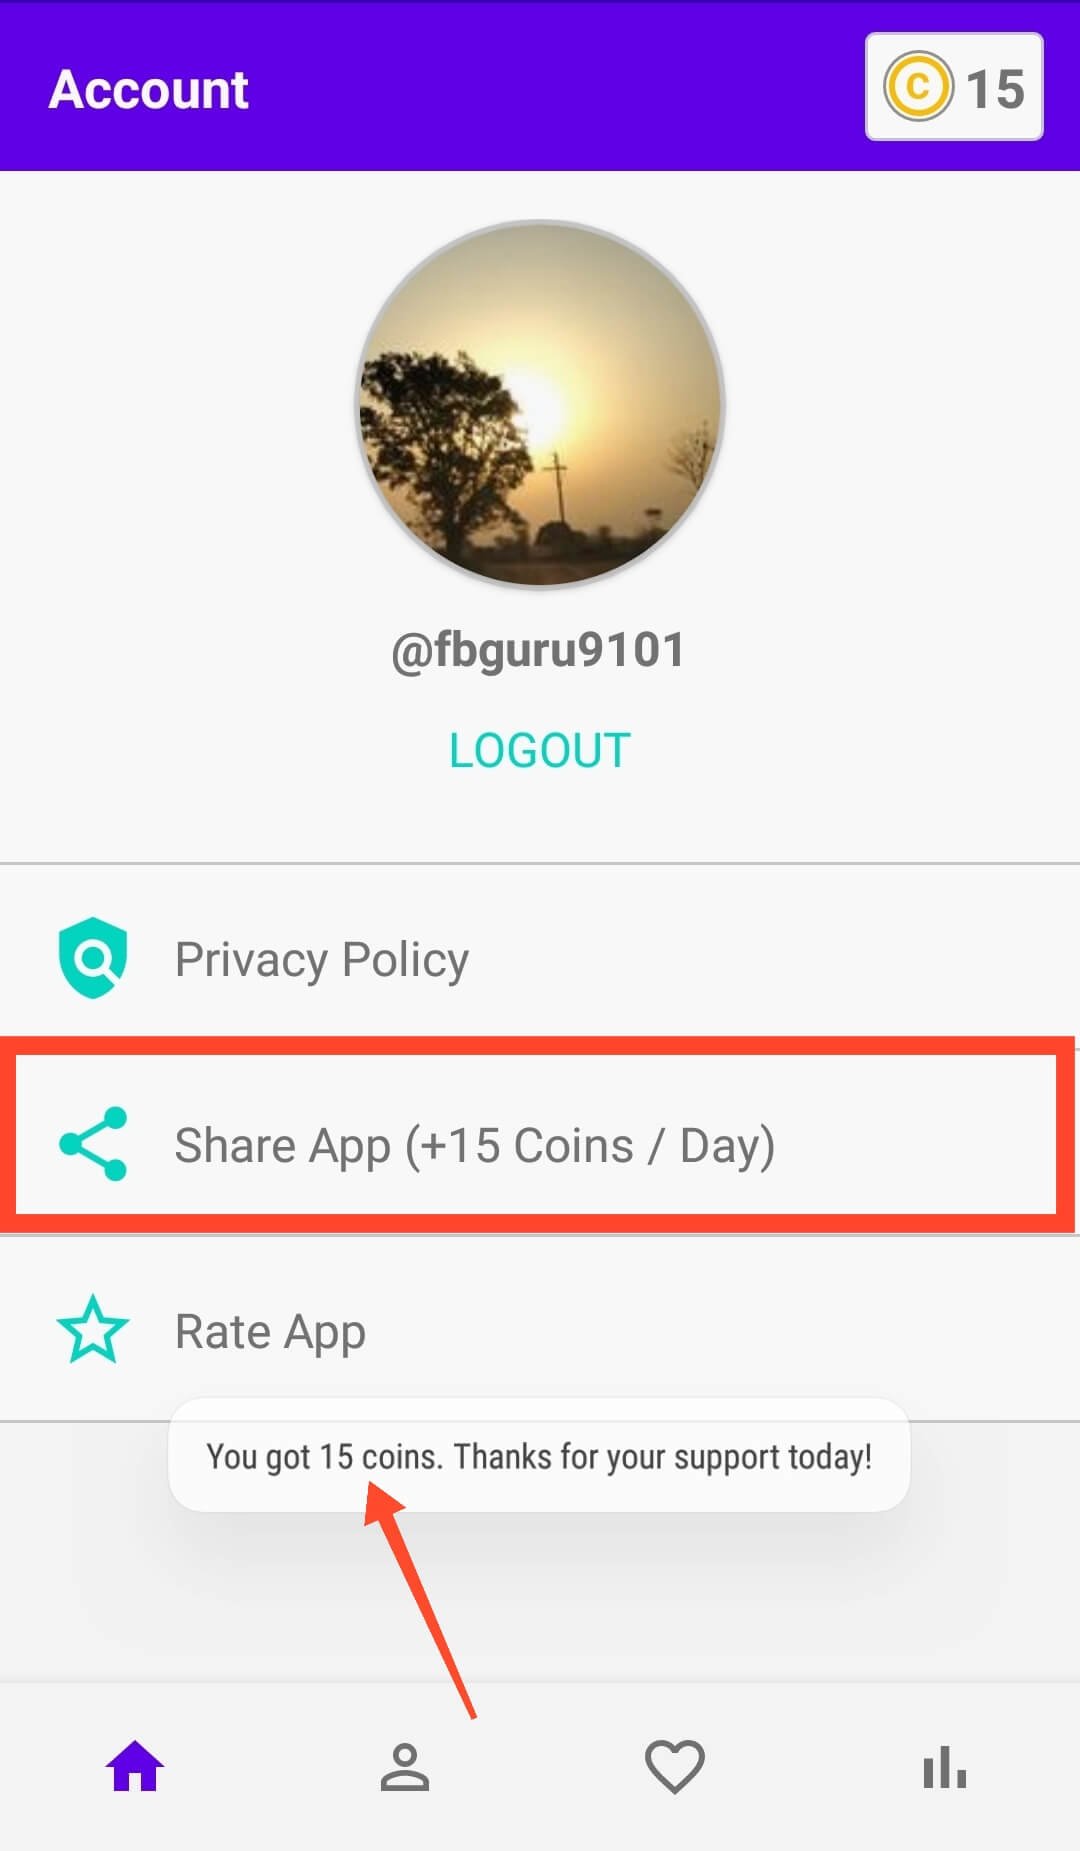 Share App and Earn Coins